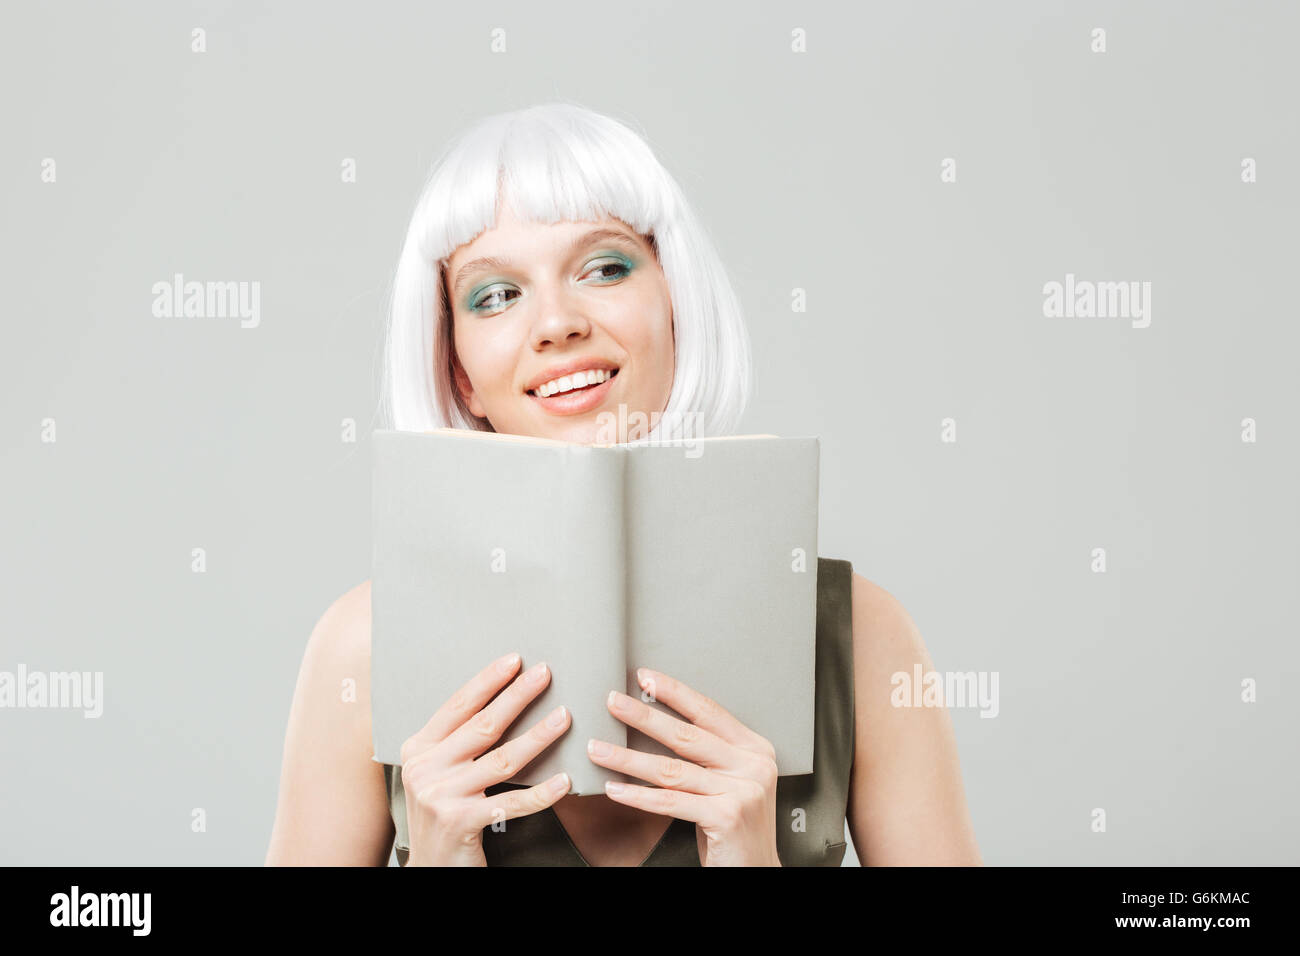 Closeup of happy lovely young woman in blonde wig smiling and reading a book over white background Stock Photo